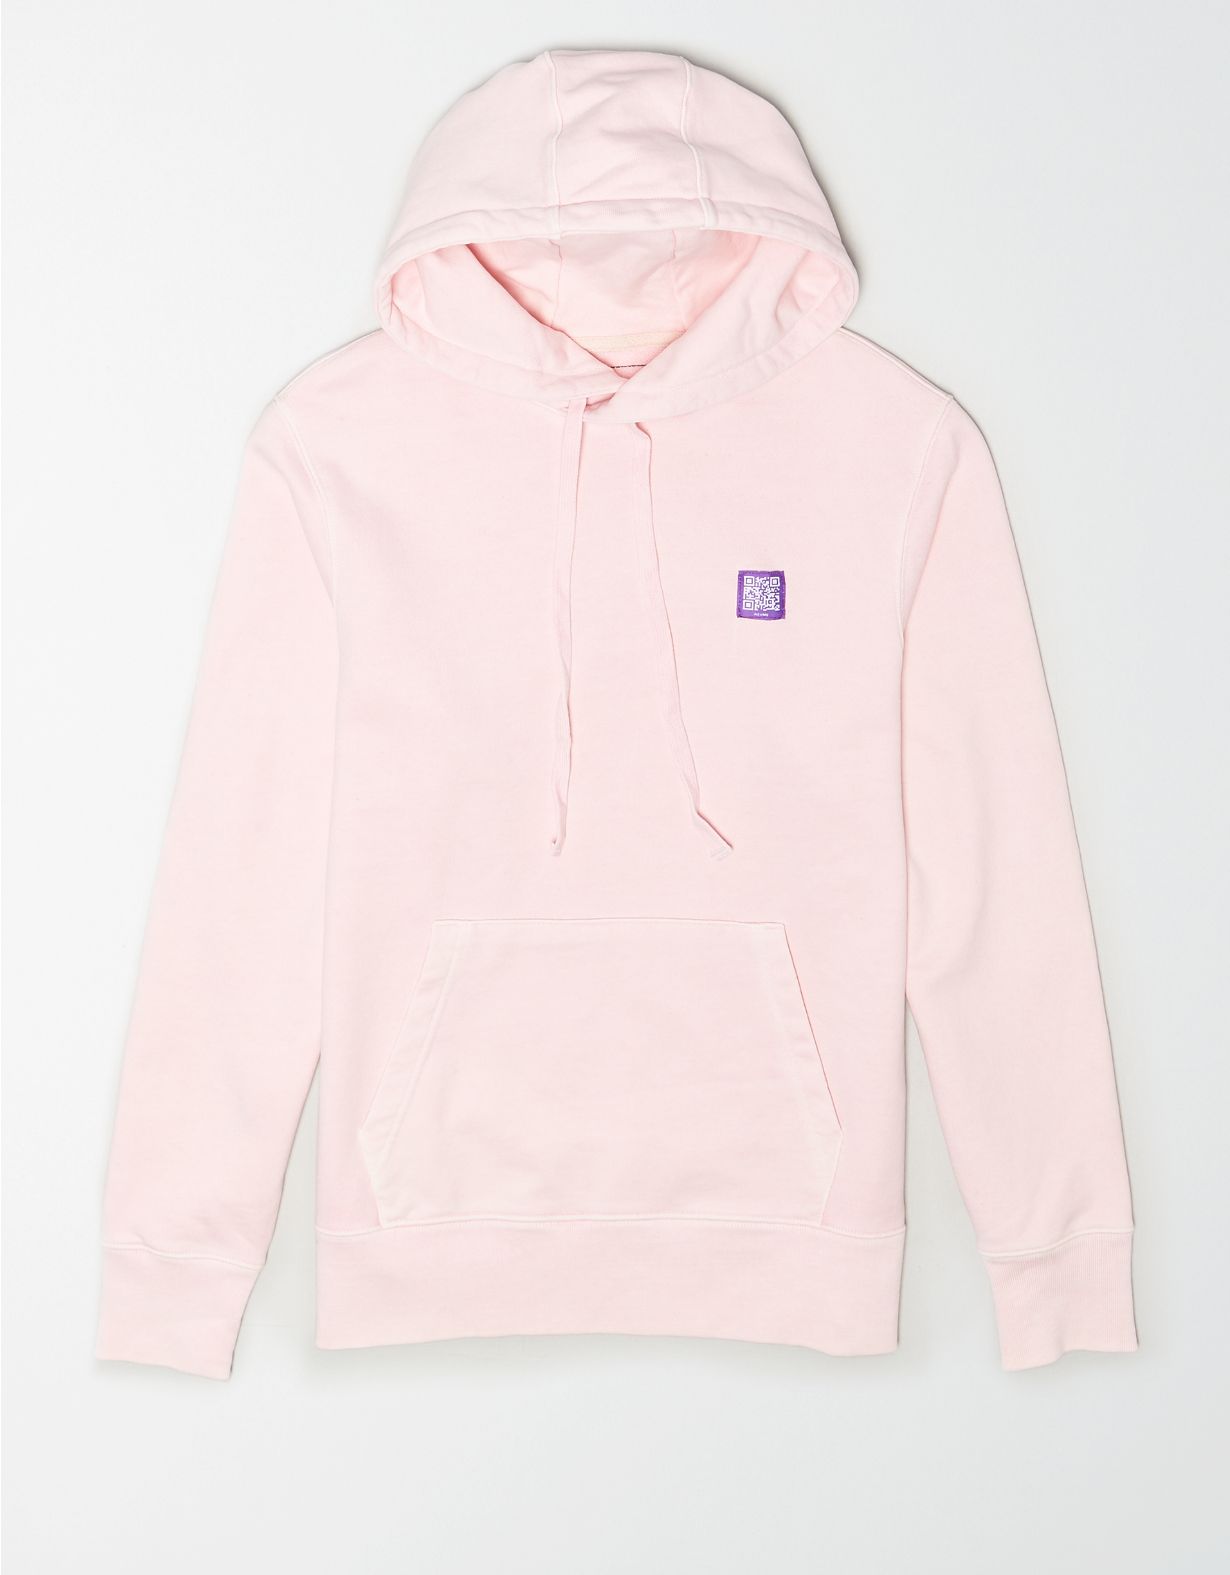 AE X Delivering Good Graphic Hoodie